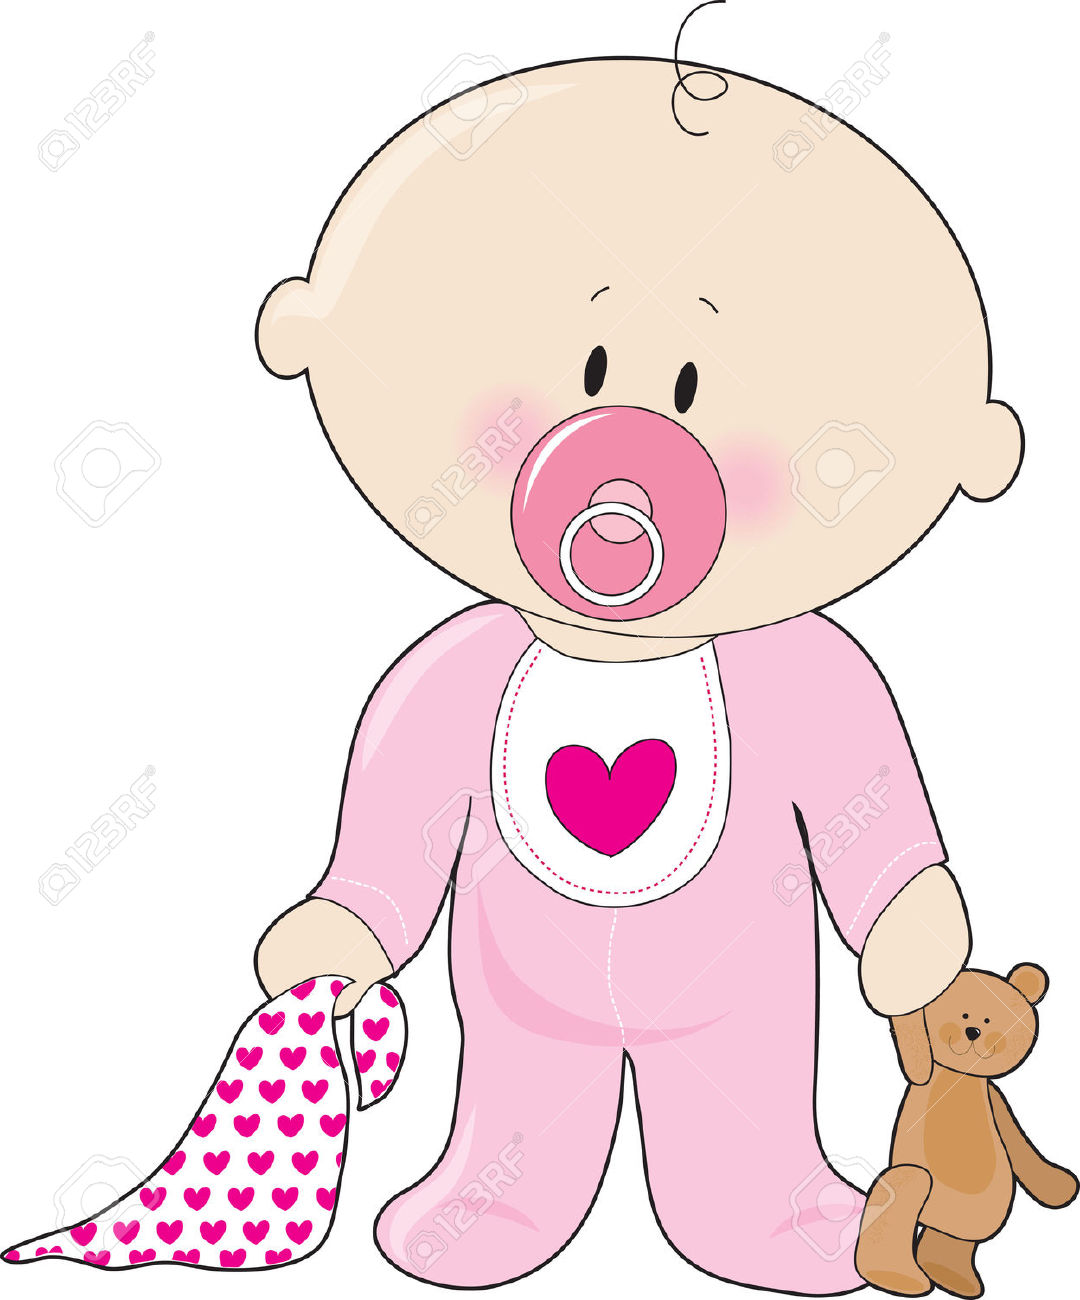 Baby clipart girl 2 » Clipart Station.